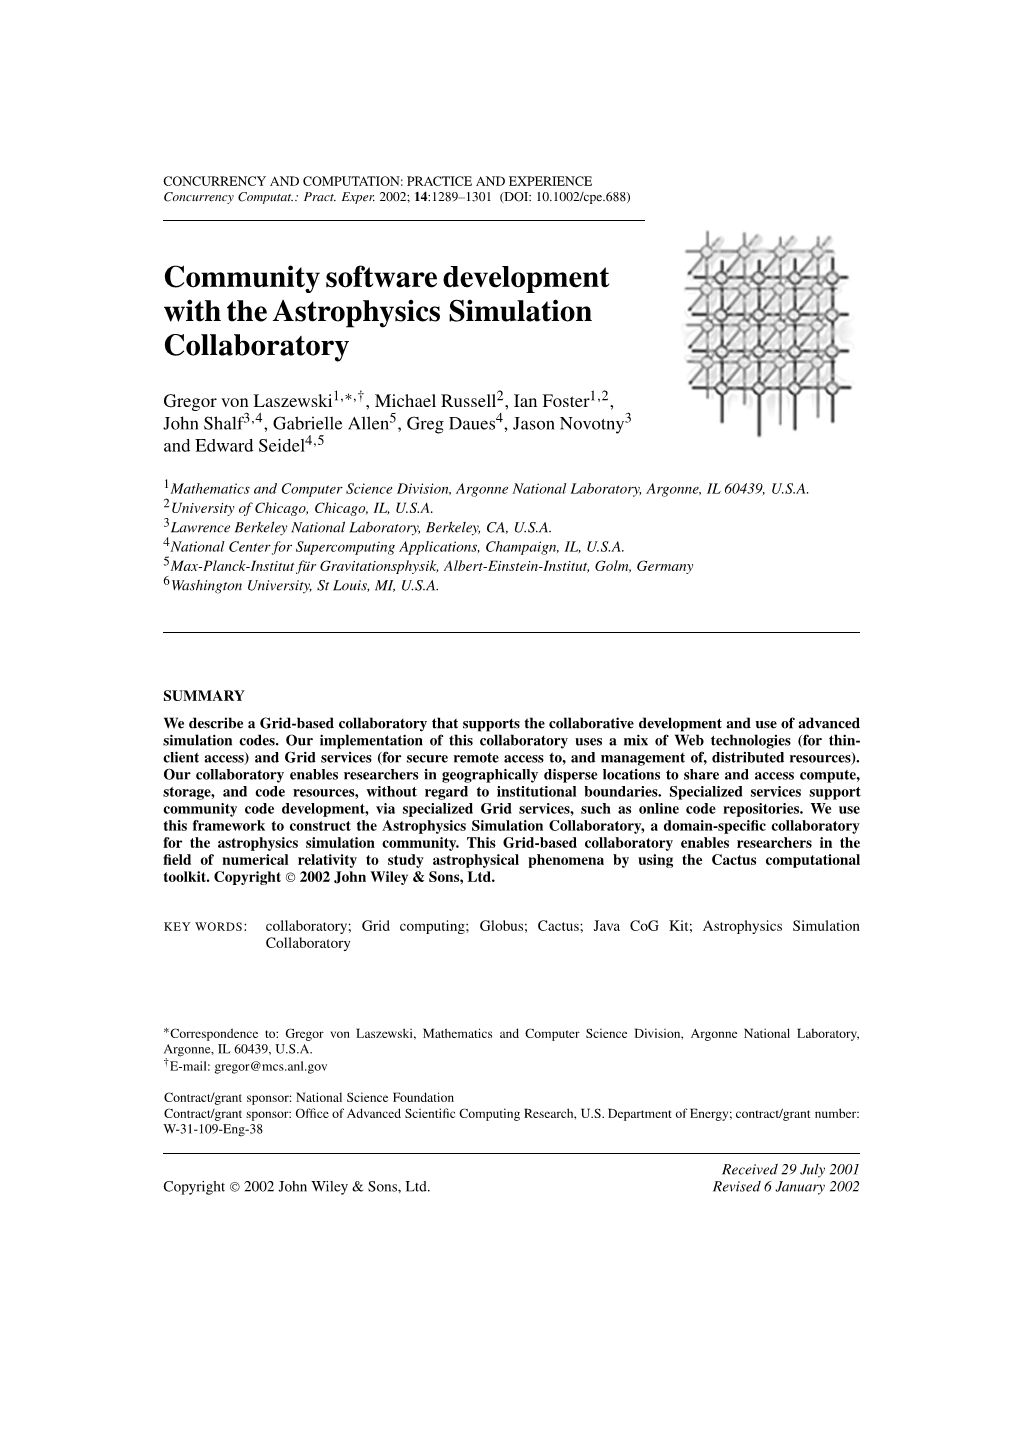 Community Software Development with the Astrophysics Simulation Collaboratory